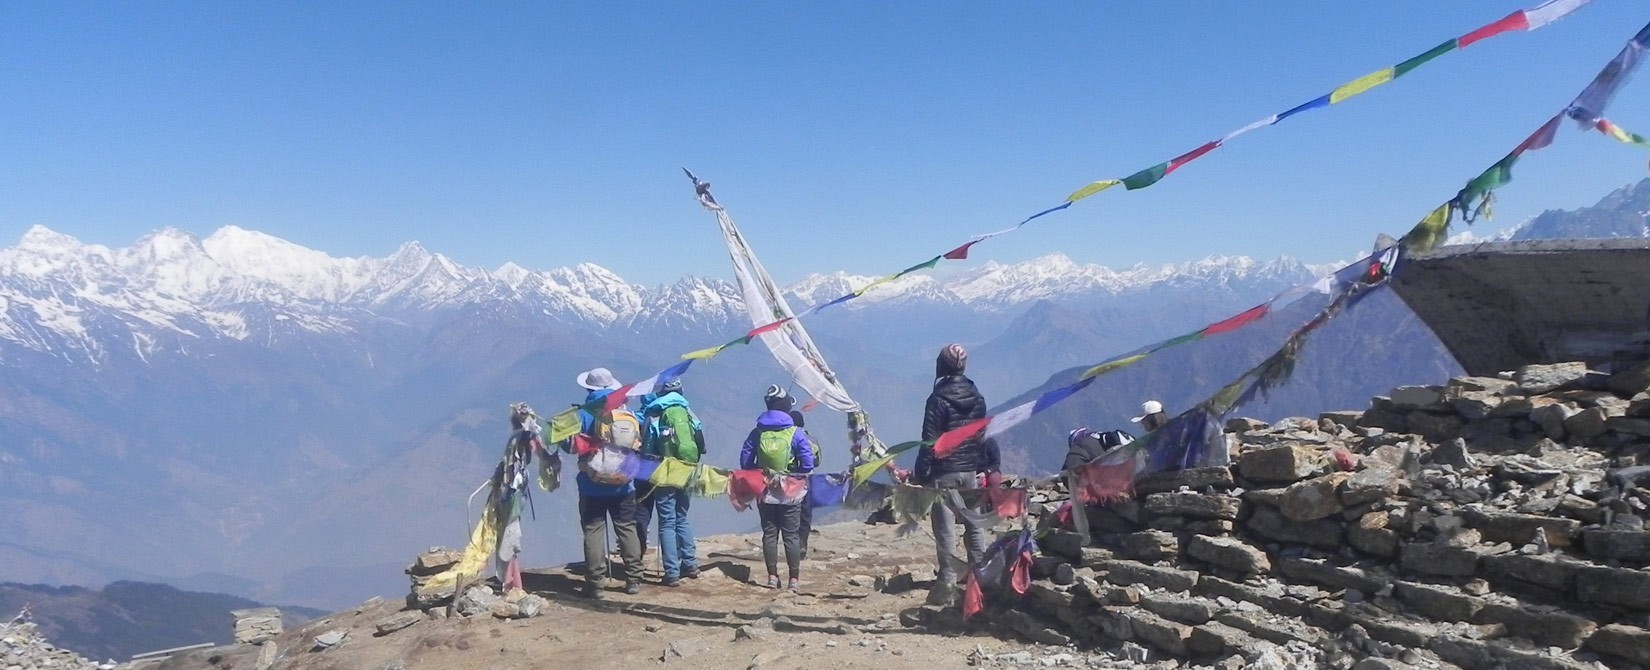 Discover the langtand Himalayan Region in Nepal 